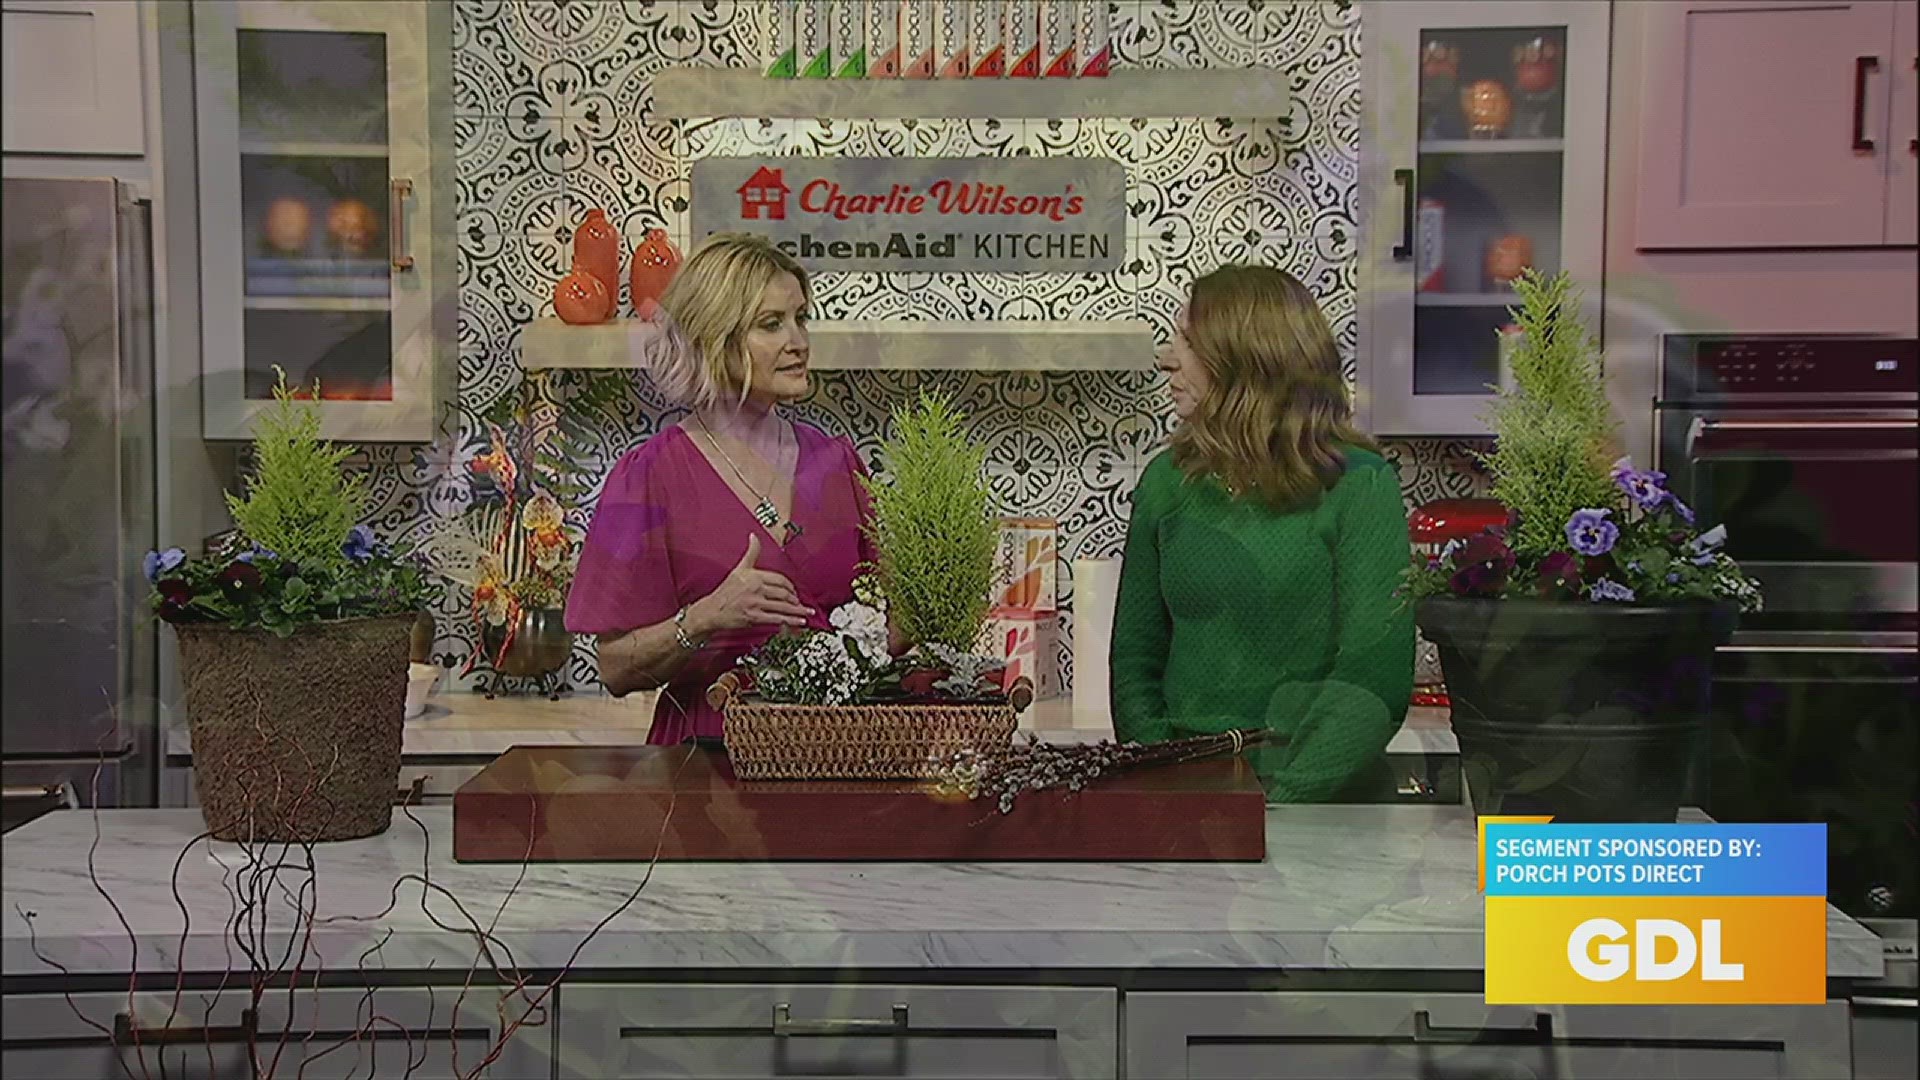 Porch Pots Direct on Great Day Live!